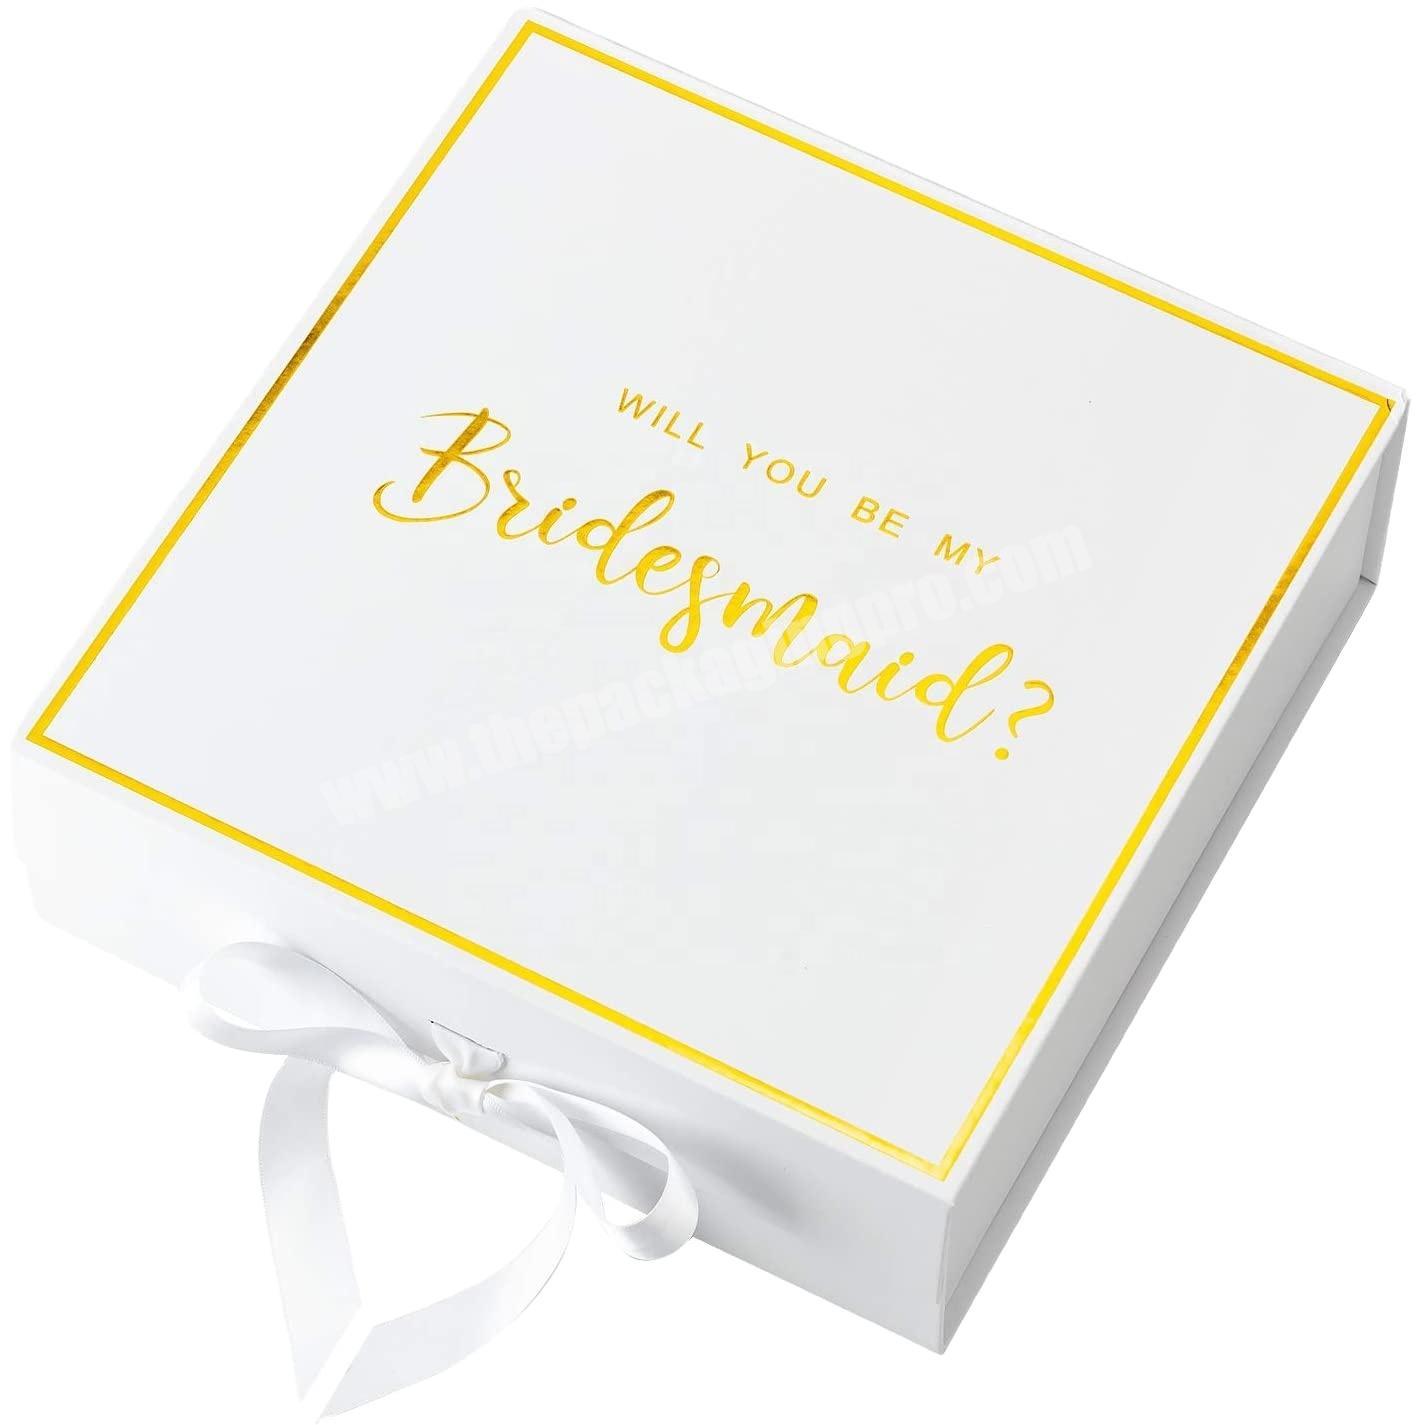 White bridesmaid proposal box gold foiled text empty boxes wedding present